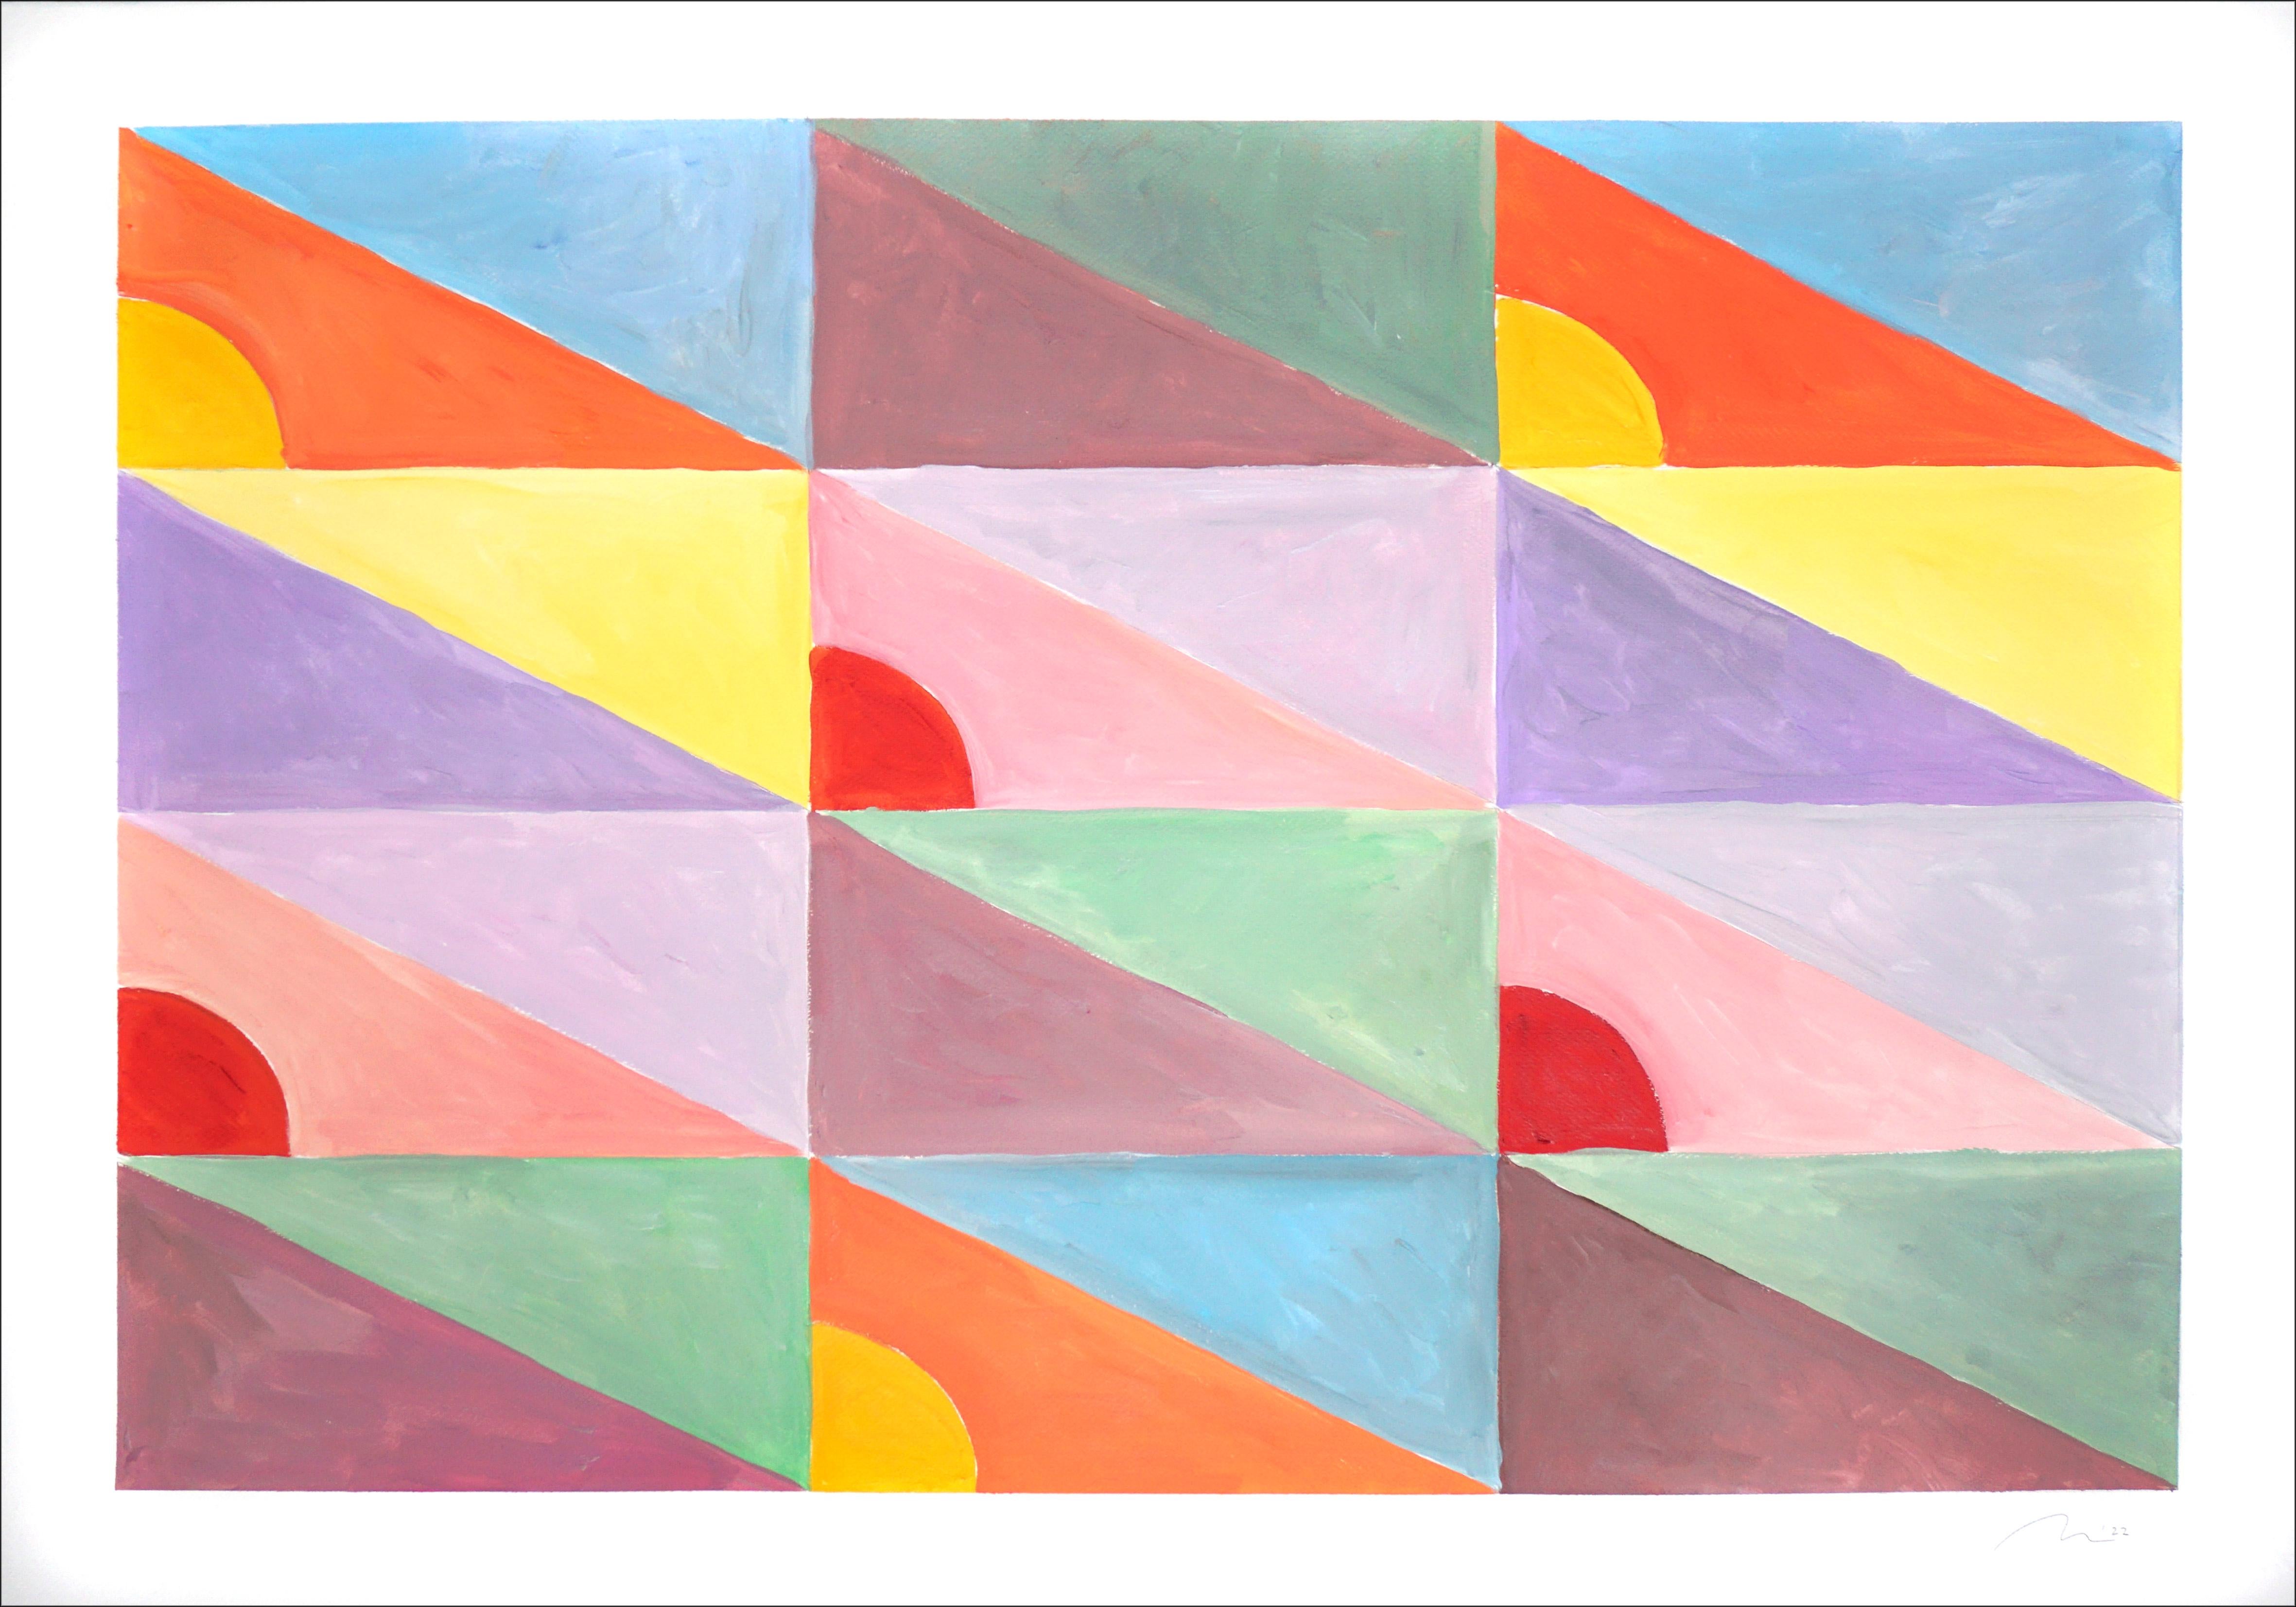 Pastel Diagonal Tiled Floor, Abstract Sun Shapes, Pink, Yellow and Red Triangles